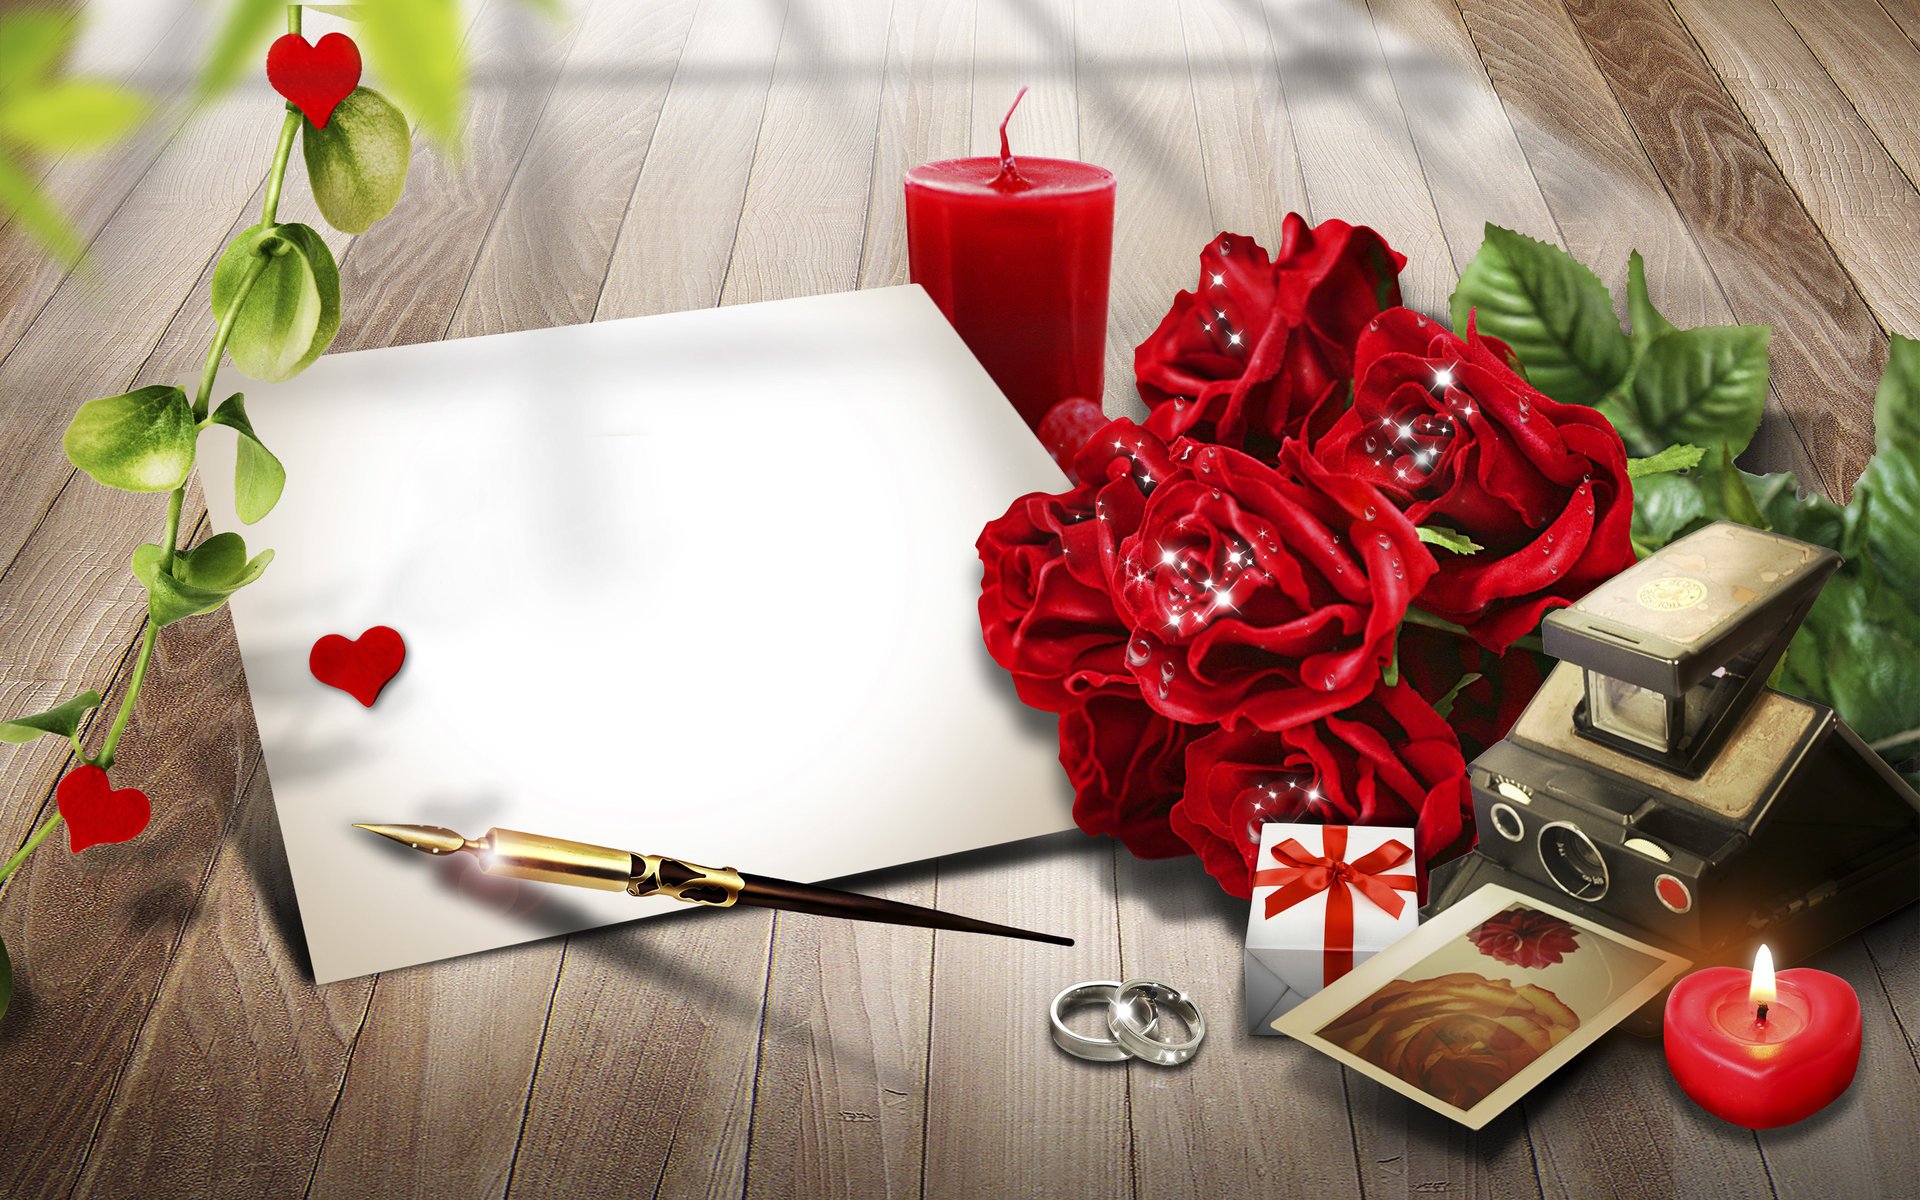 A romantic letter inspired by pictures and flowers